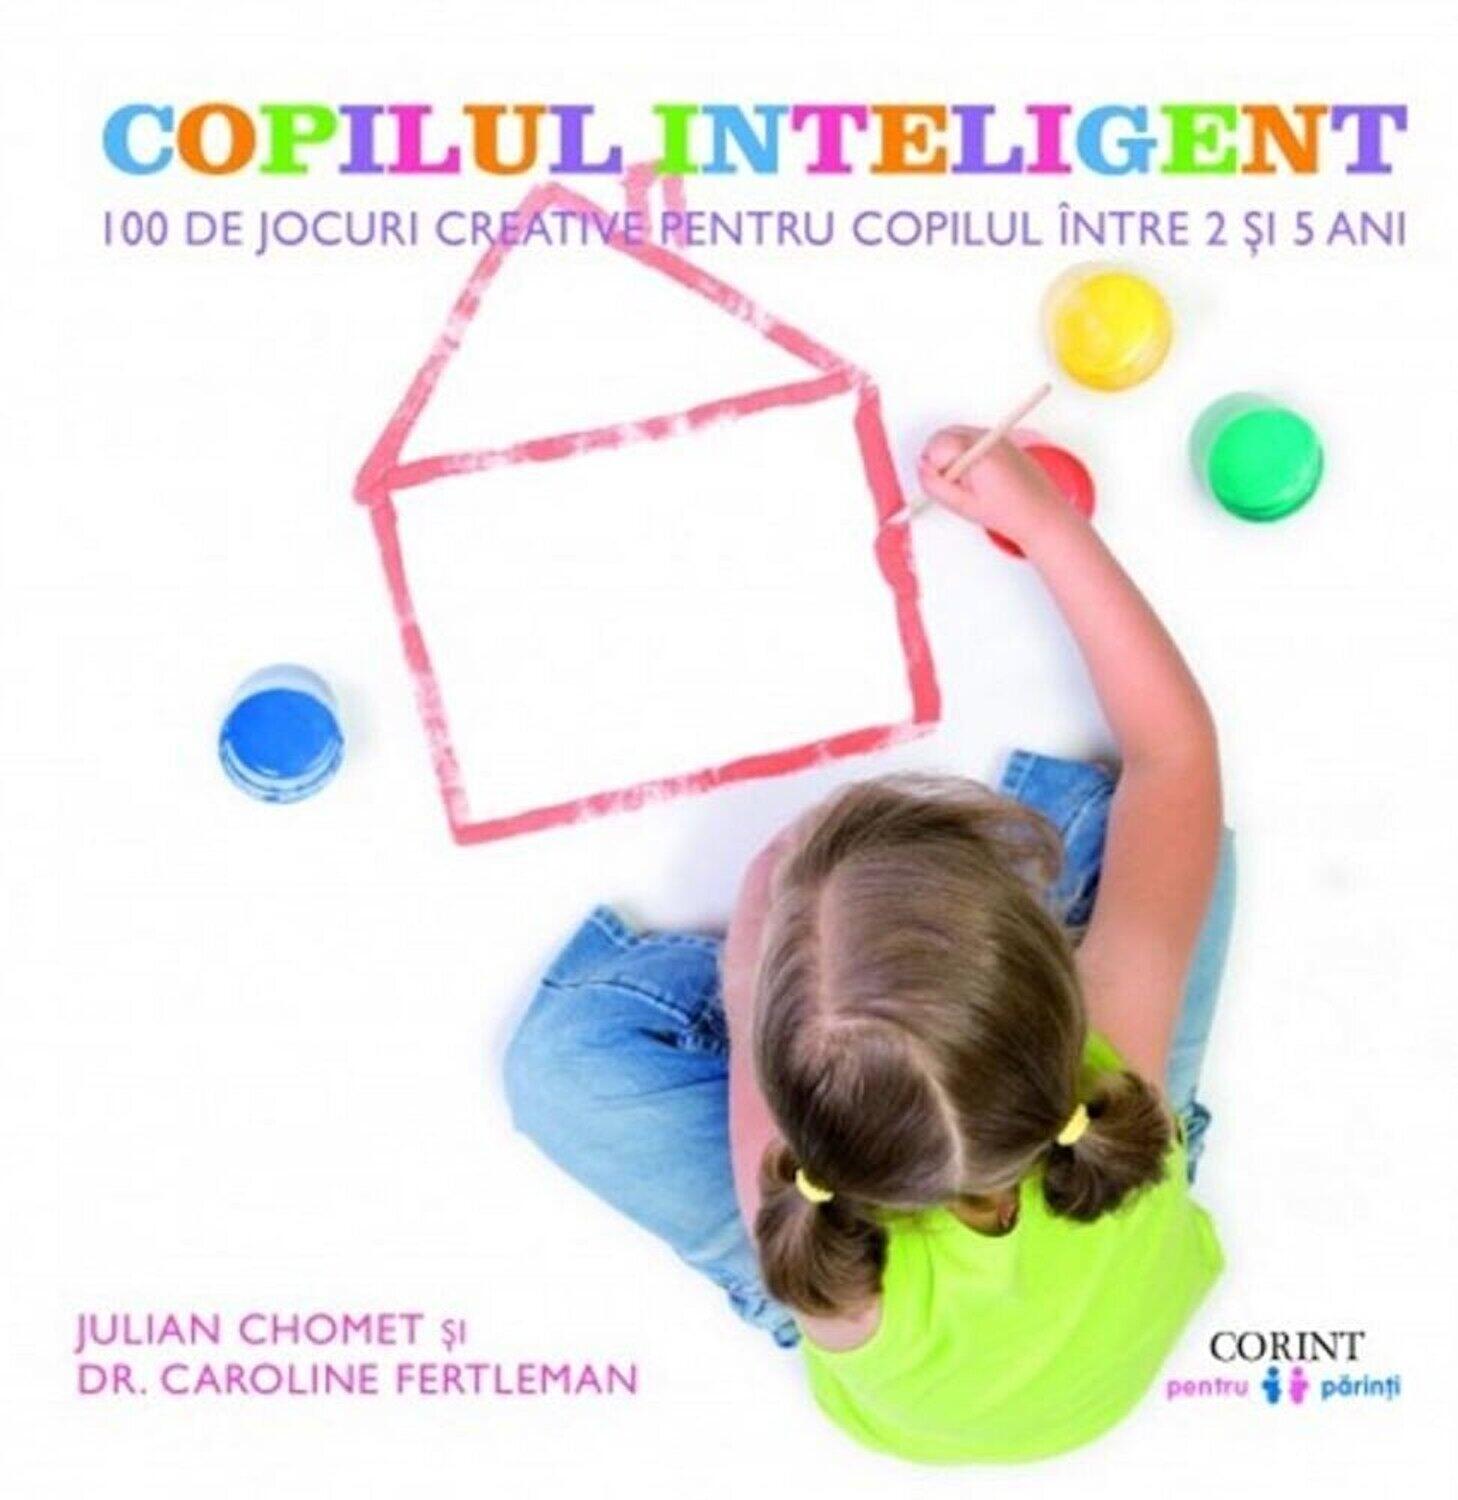 Copilul inteligent PlayLearn Toys